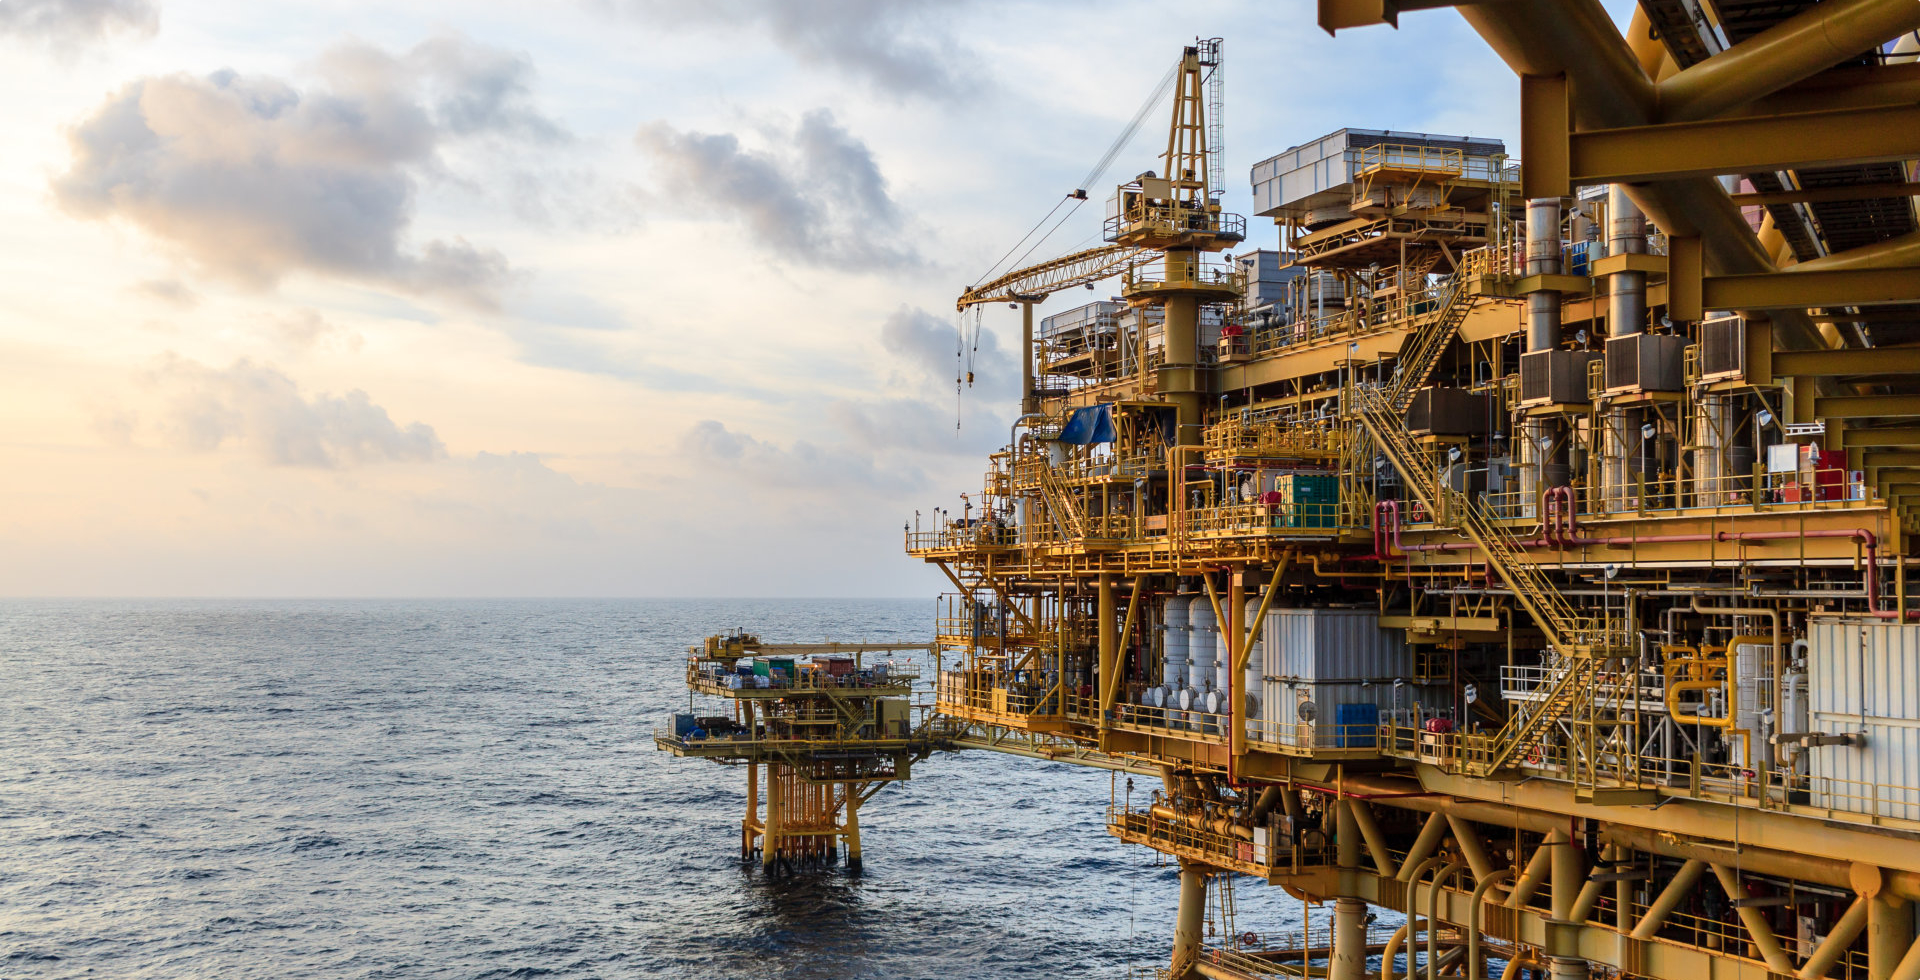 Offshore oil and Gas central processing platform